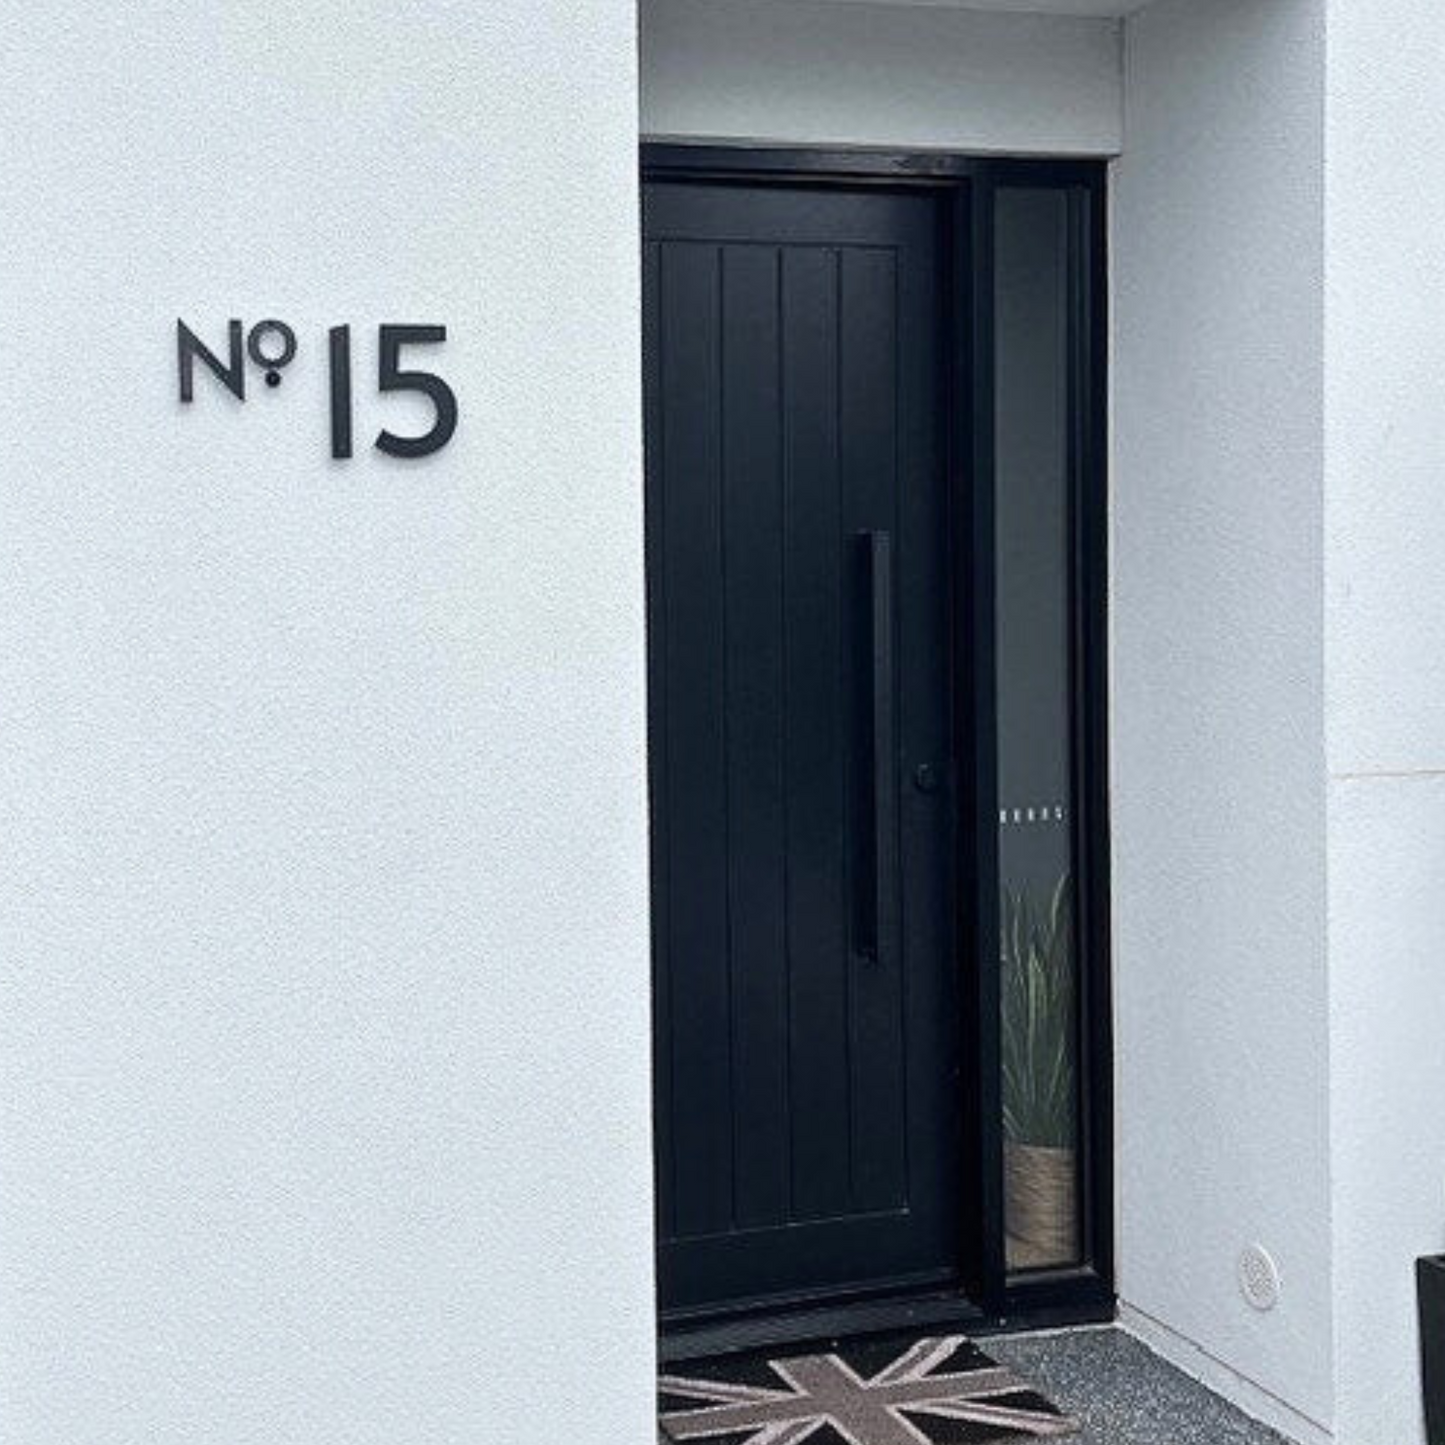 8 inch CLASSIC MODERN House numbers and letters